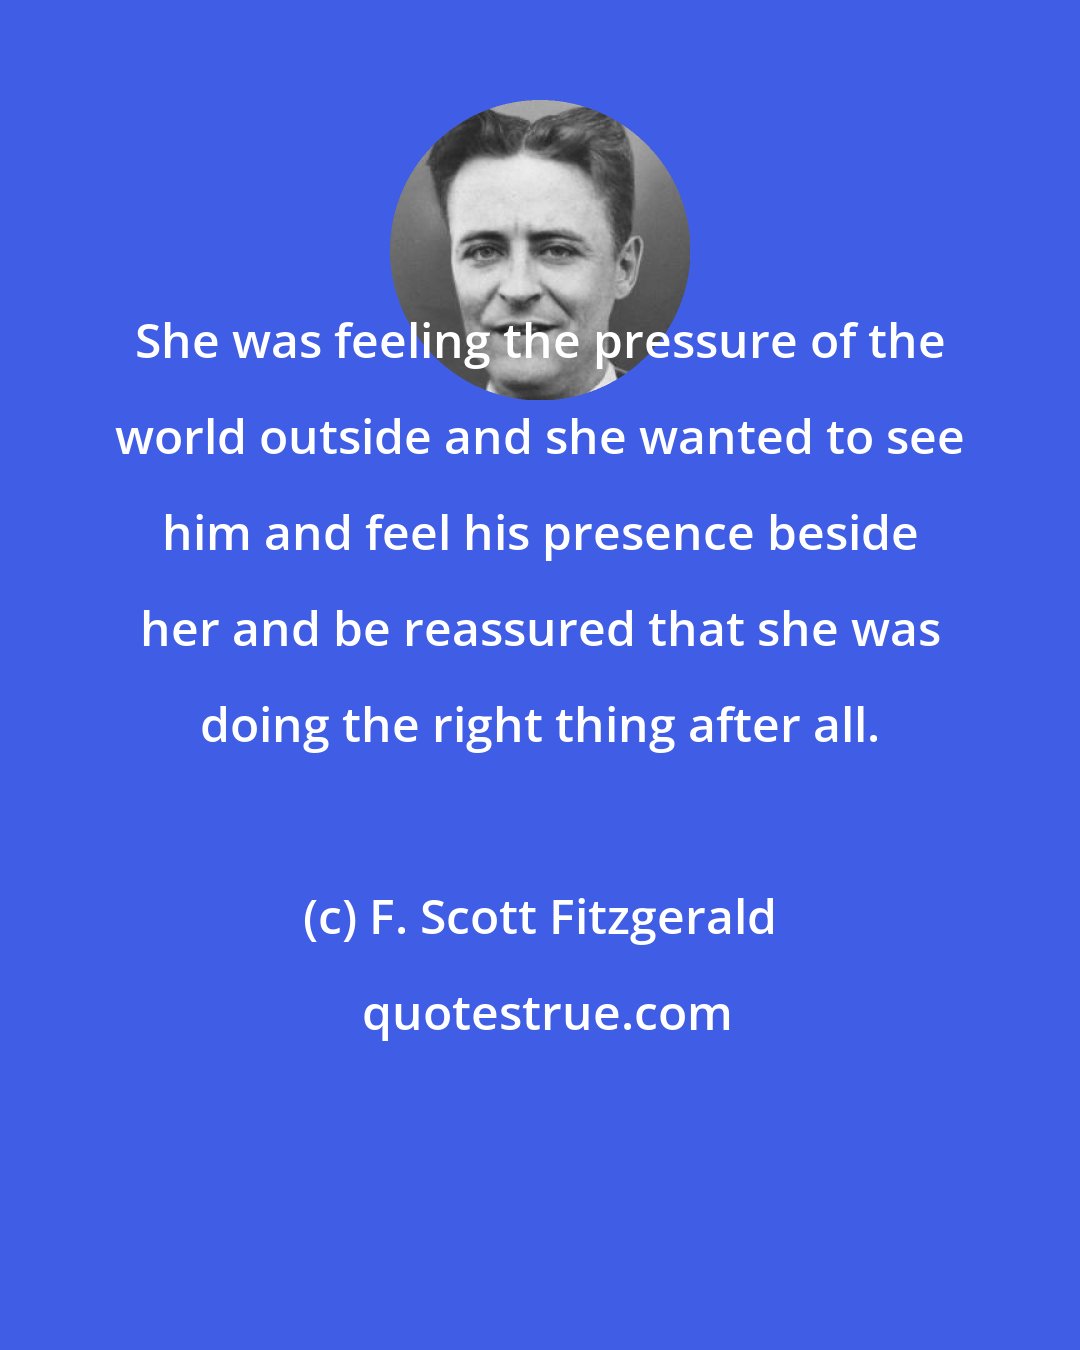 F. Scott Fitzgerald: She was feeling the pressure of the world outside and she wanted to see him and feel his presence beside her and be reassured that she was doing the right thing after all.